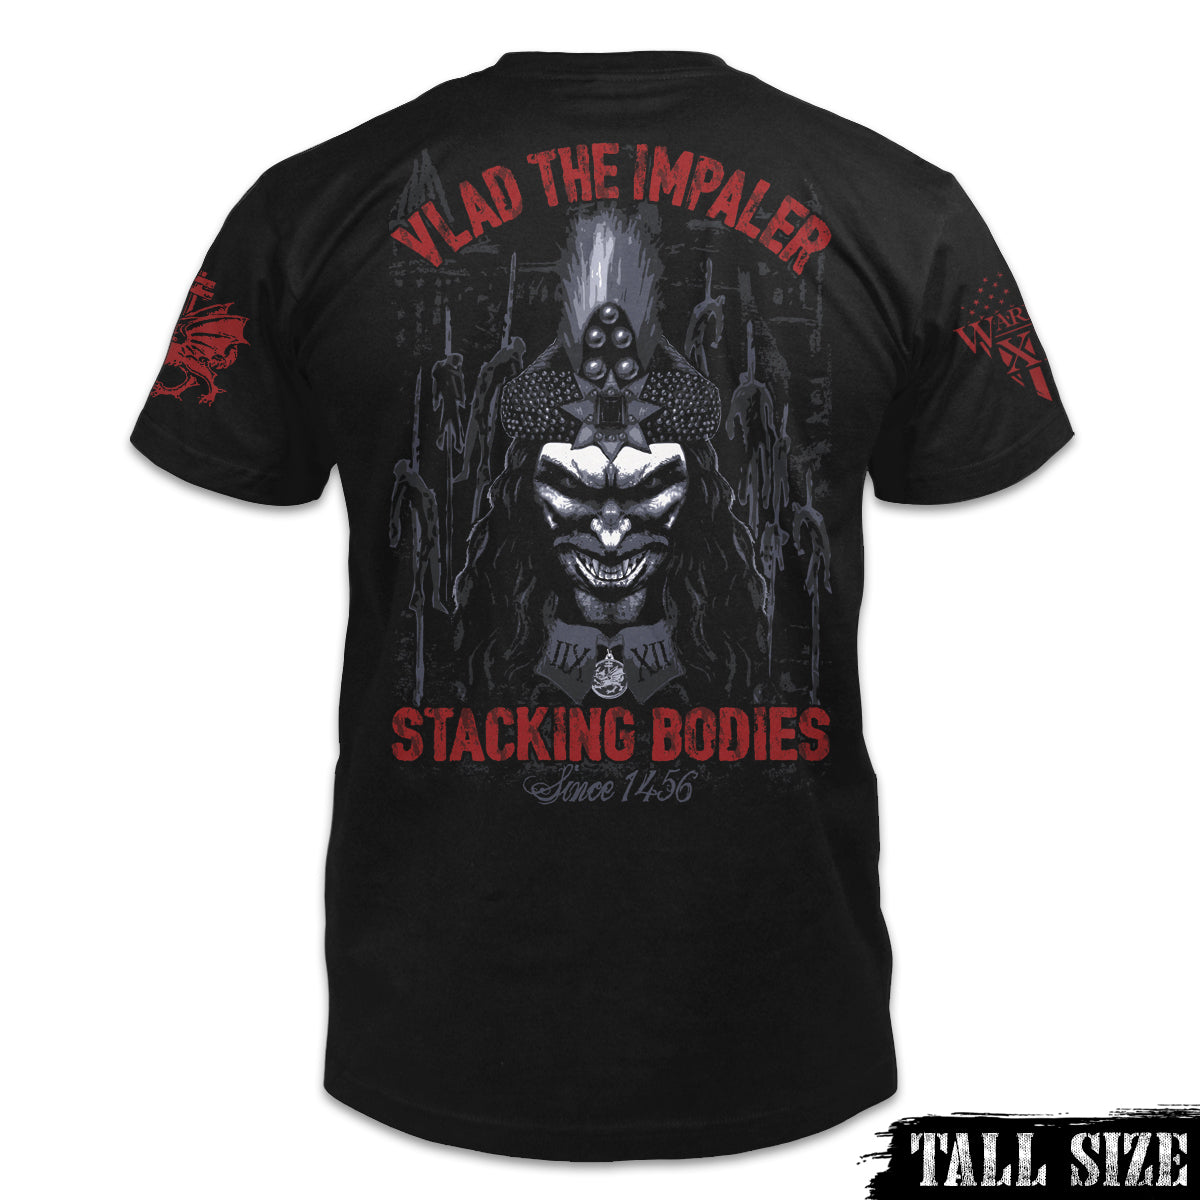 A black tall size shirt with the words "Vlad The Impaler, Stacking bodies since 1456" with a Vlad printed on the back of the shirt.